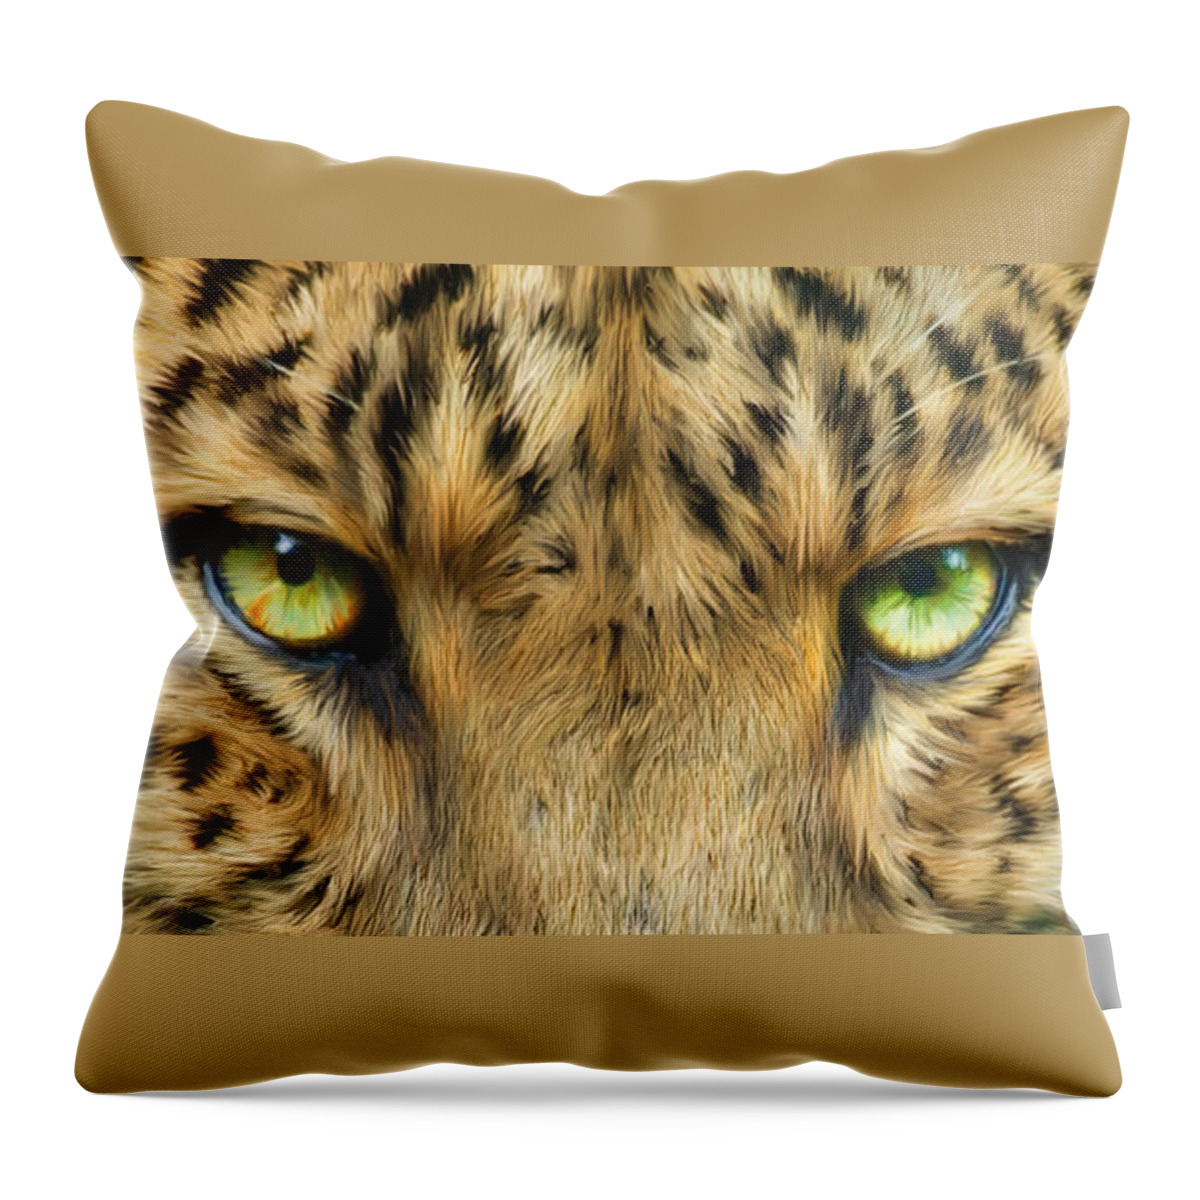 Leopard Throw Pillow featuring the mixed media Wild Eyes - Leopard by Carol Cavalaris